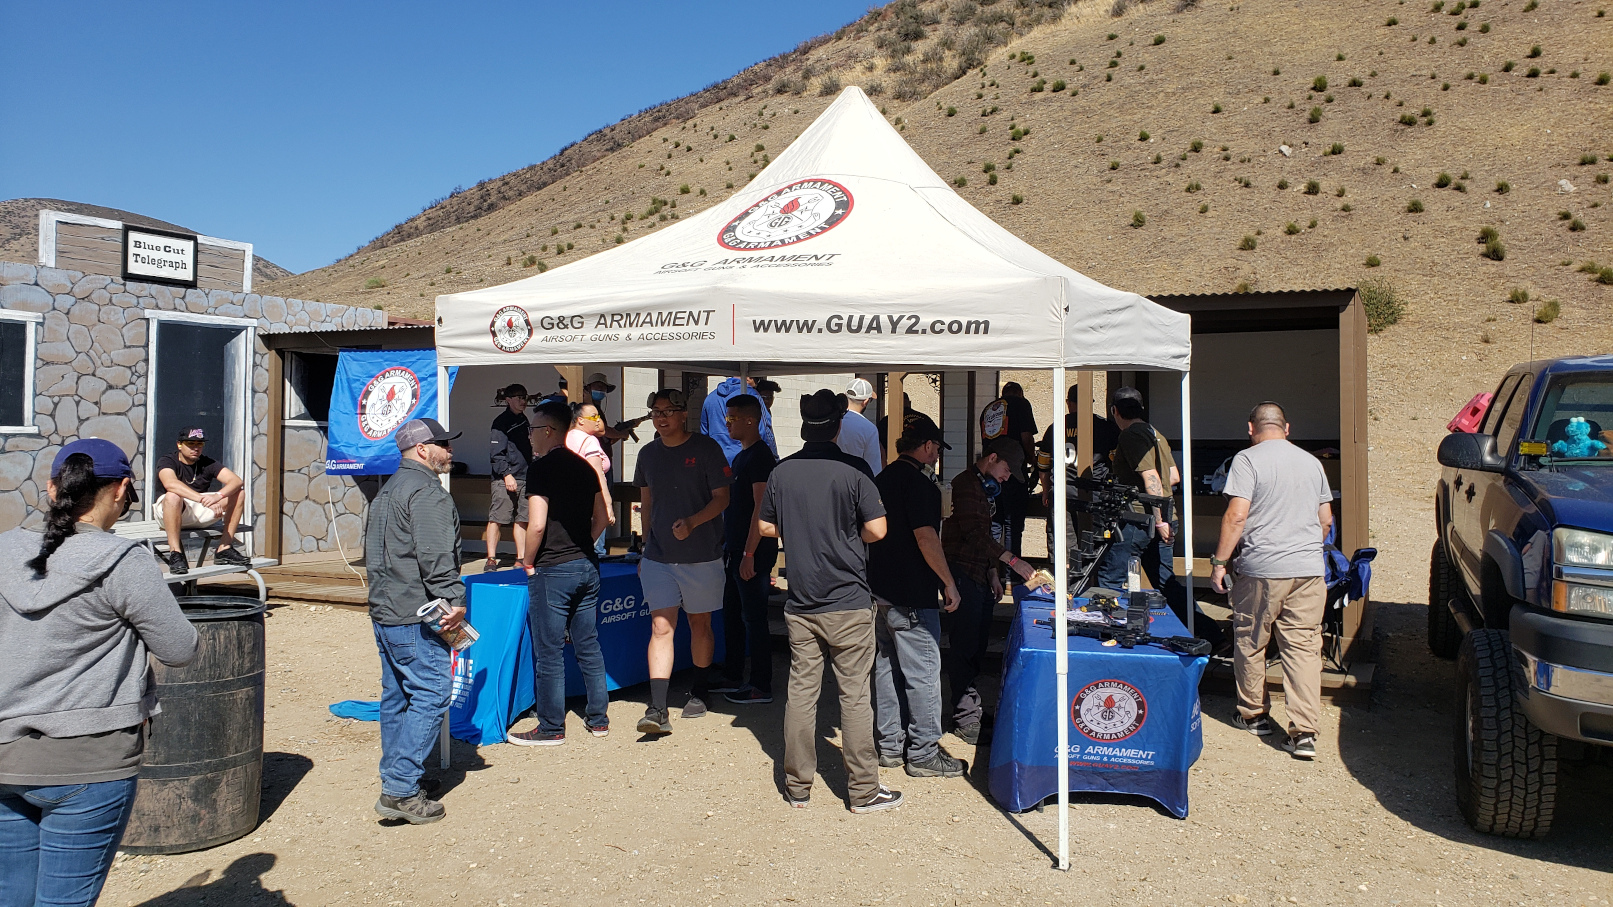 G&G Armament's Tent at the Event